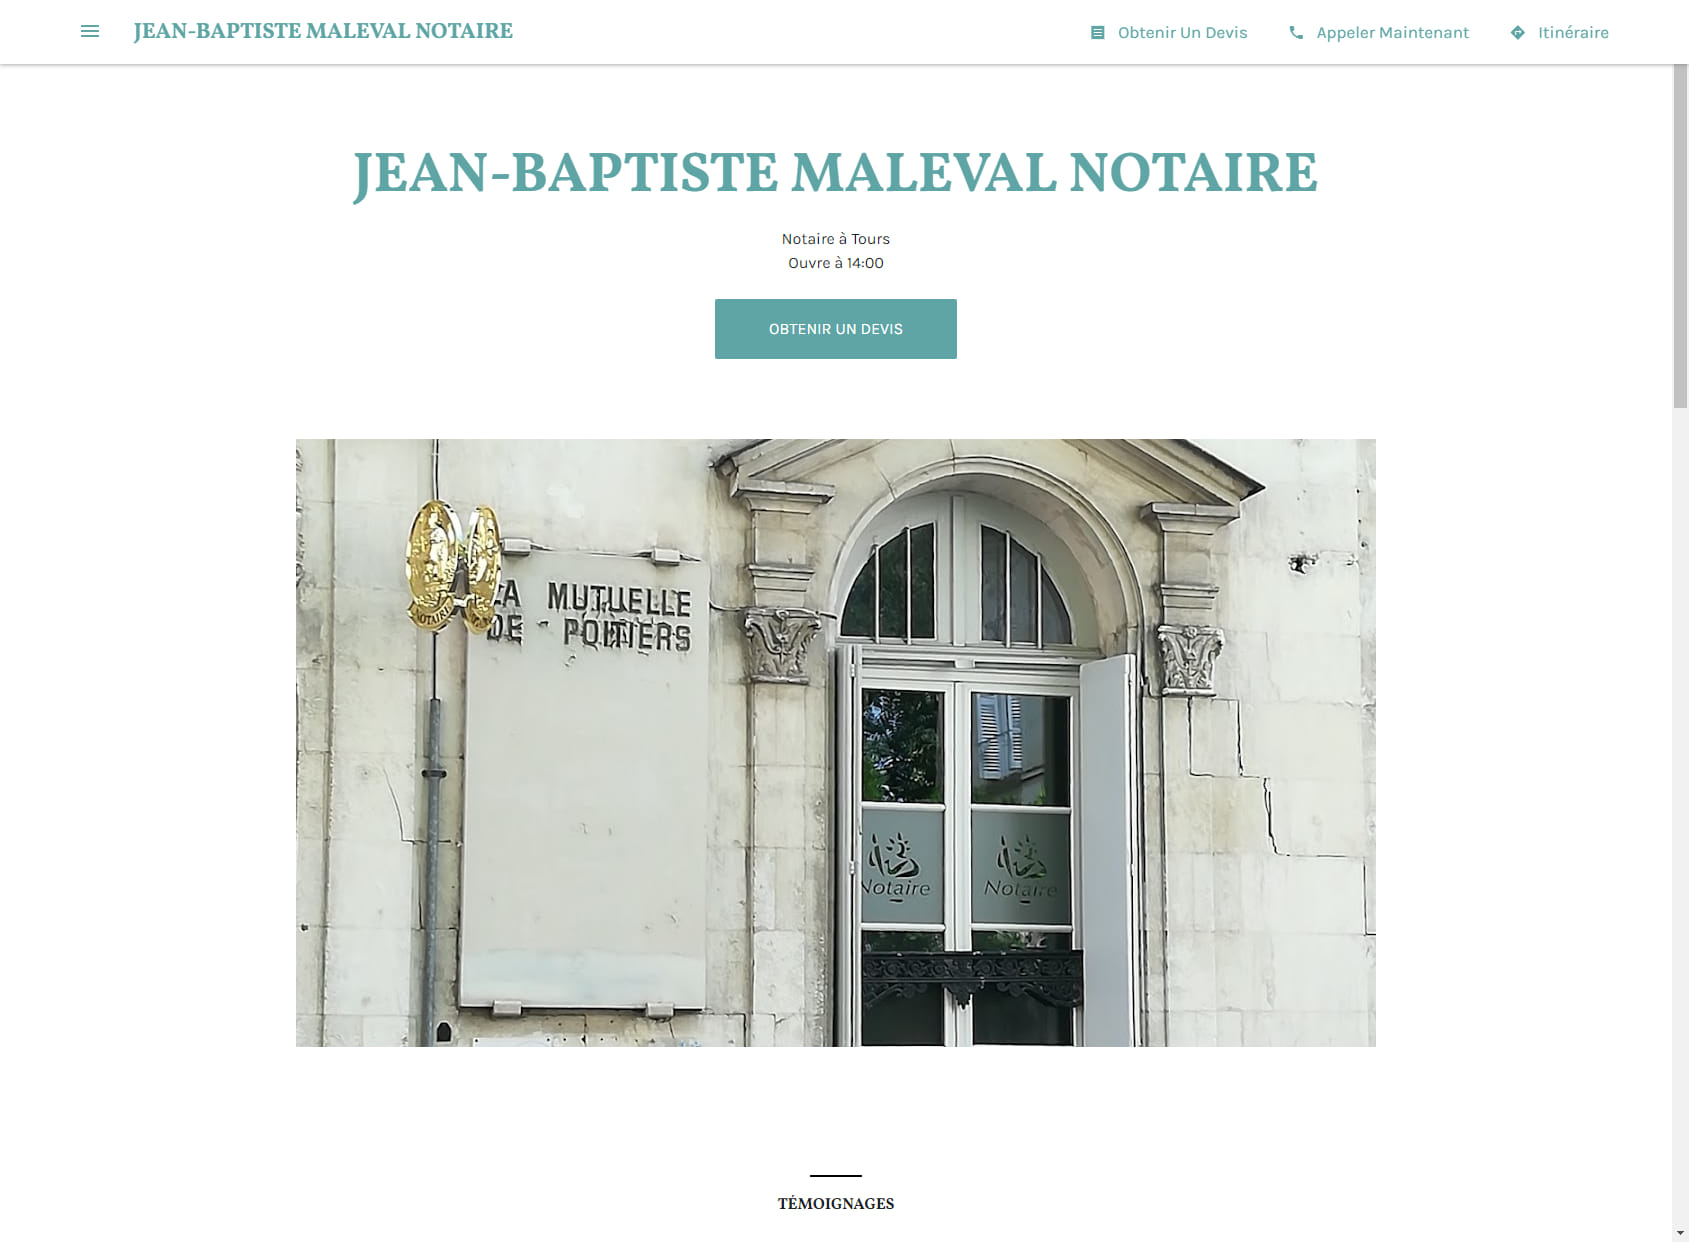 JEAN-BAPTISTE MALEVAL NOTAIRE